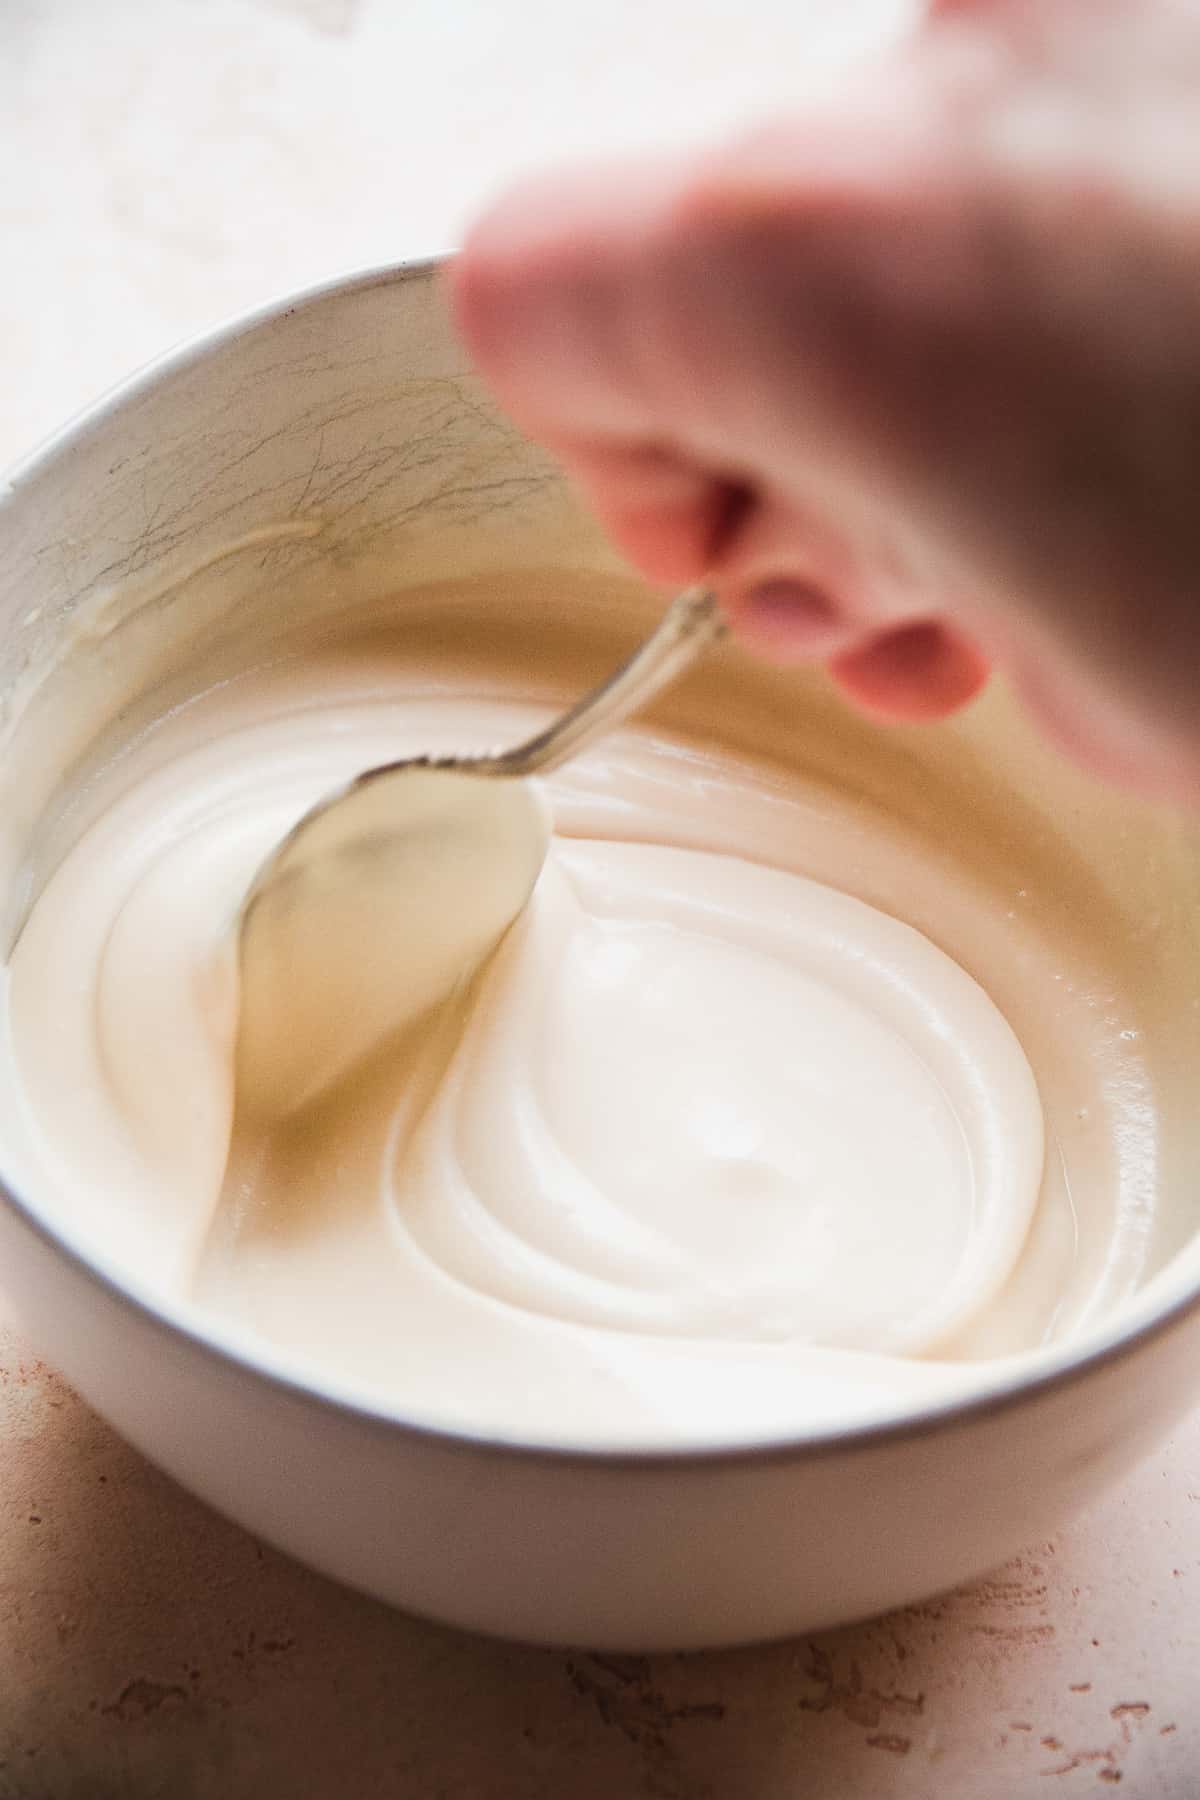 Hand swirling a spoon to mix cream cheese icing in an bowl.